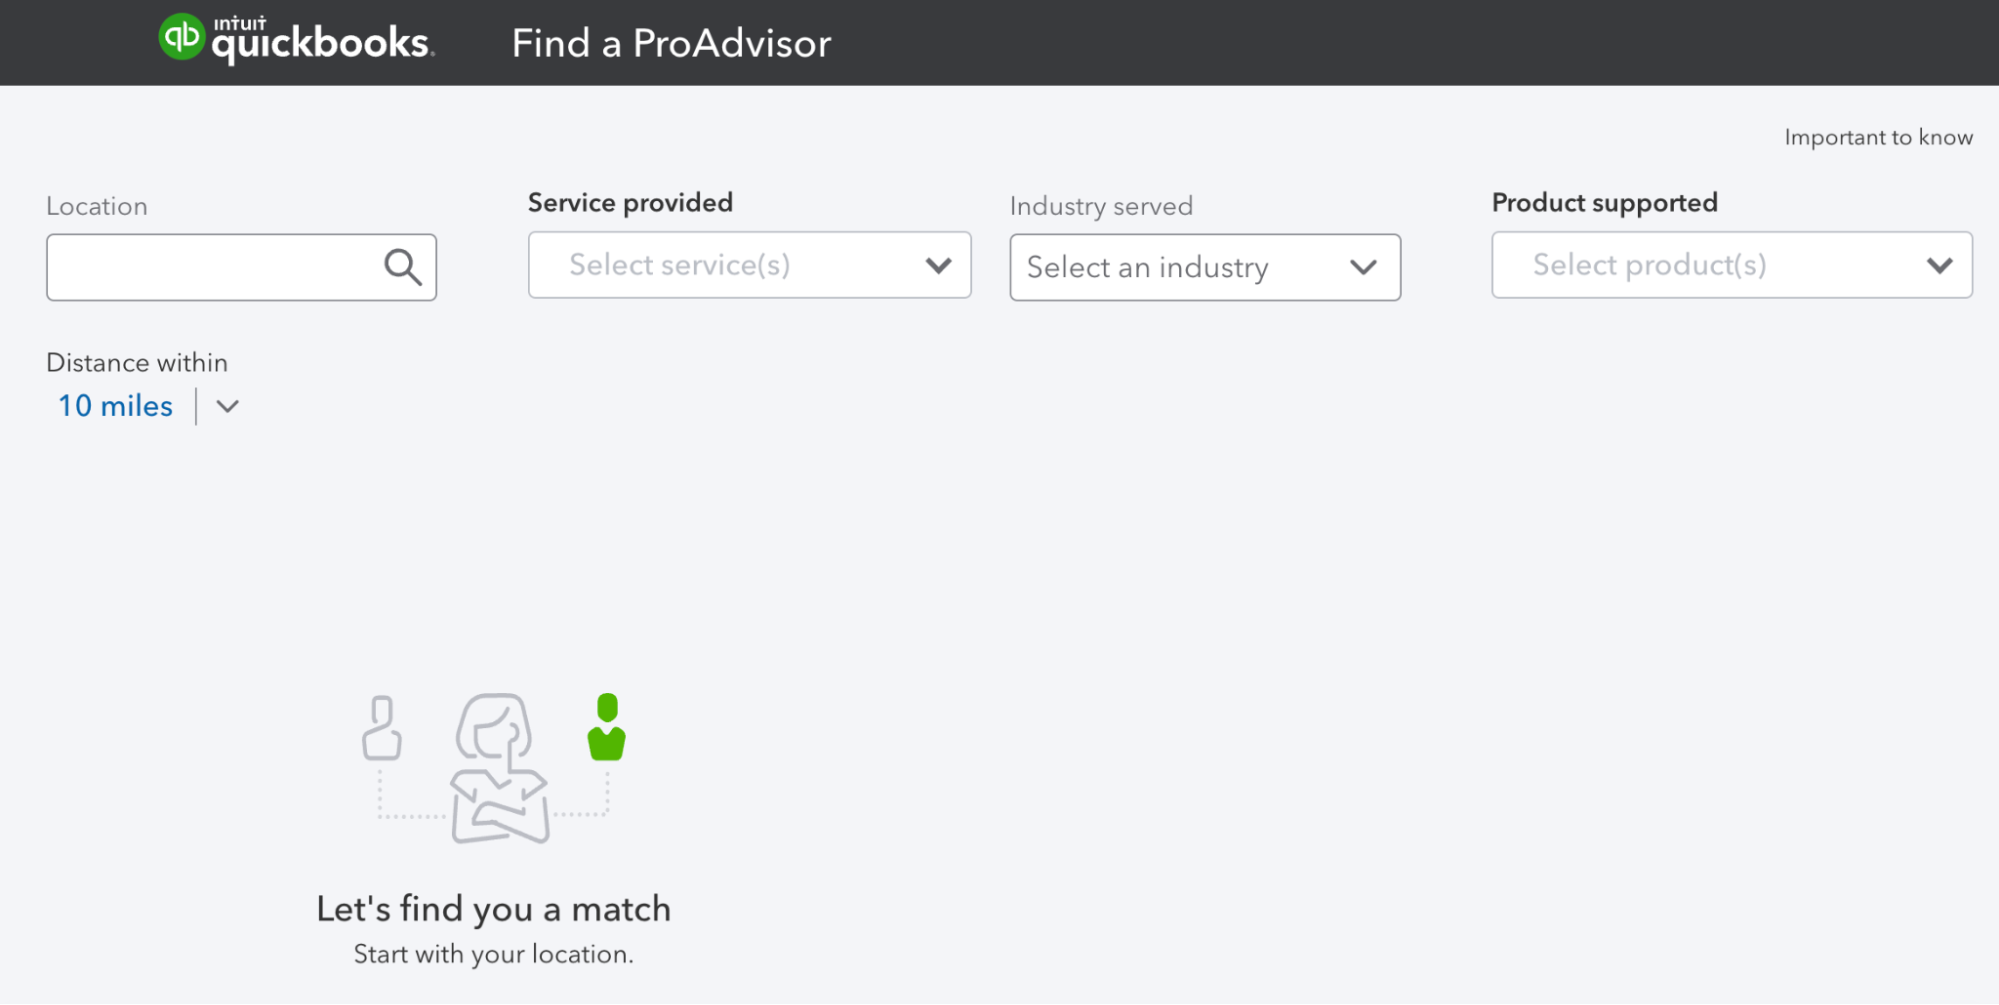 Screen where you can use filters to find a ProAdvisor on Intuit's Find a ProAdvisor website.